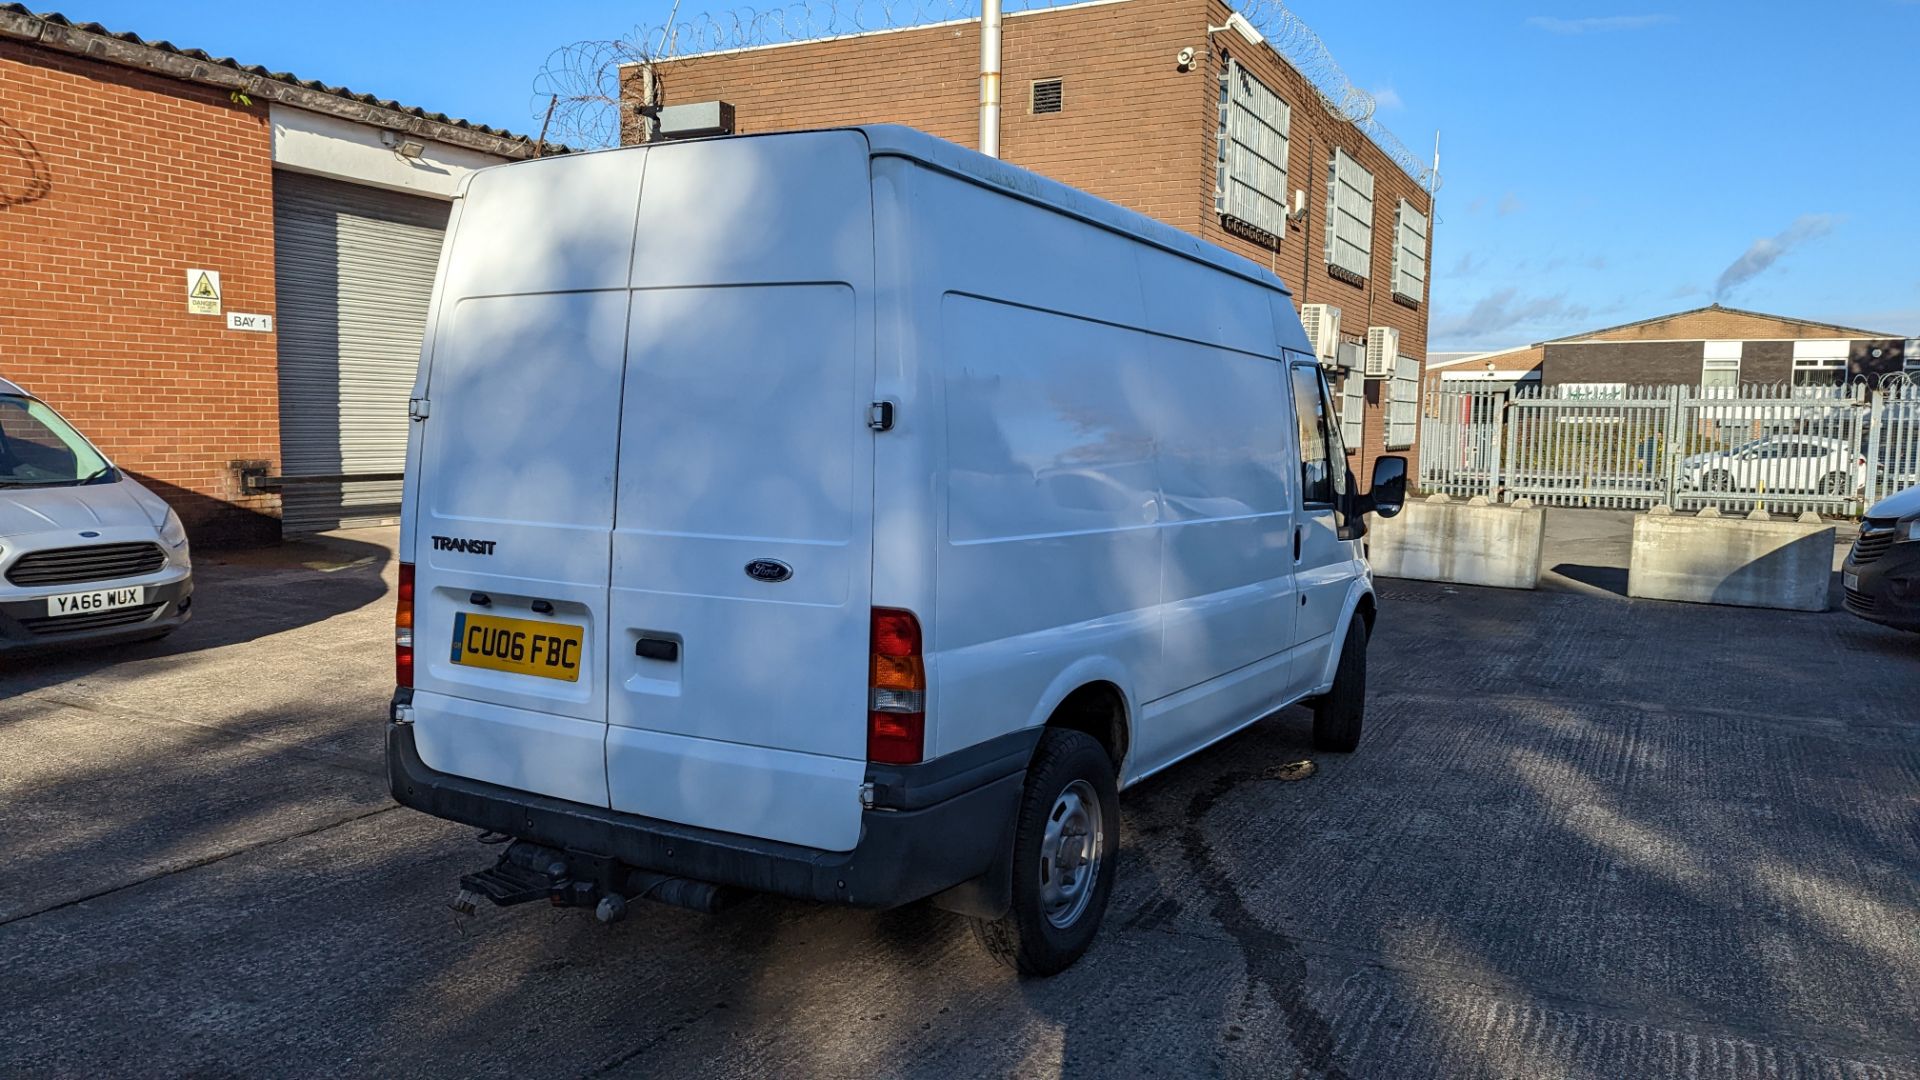 CU06 FBC Ford Transit panel van, 6 speed manual gearbox, 2402cc diesel engine. Colour: white. Fir - Image 9 of 44